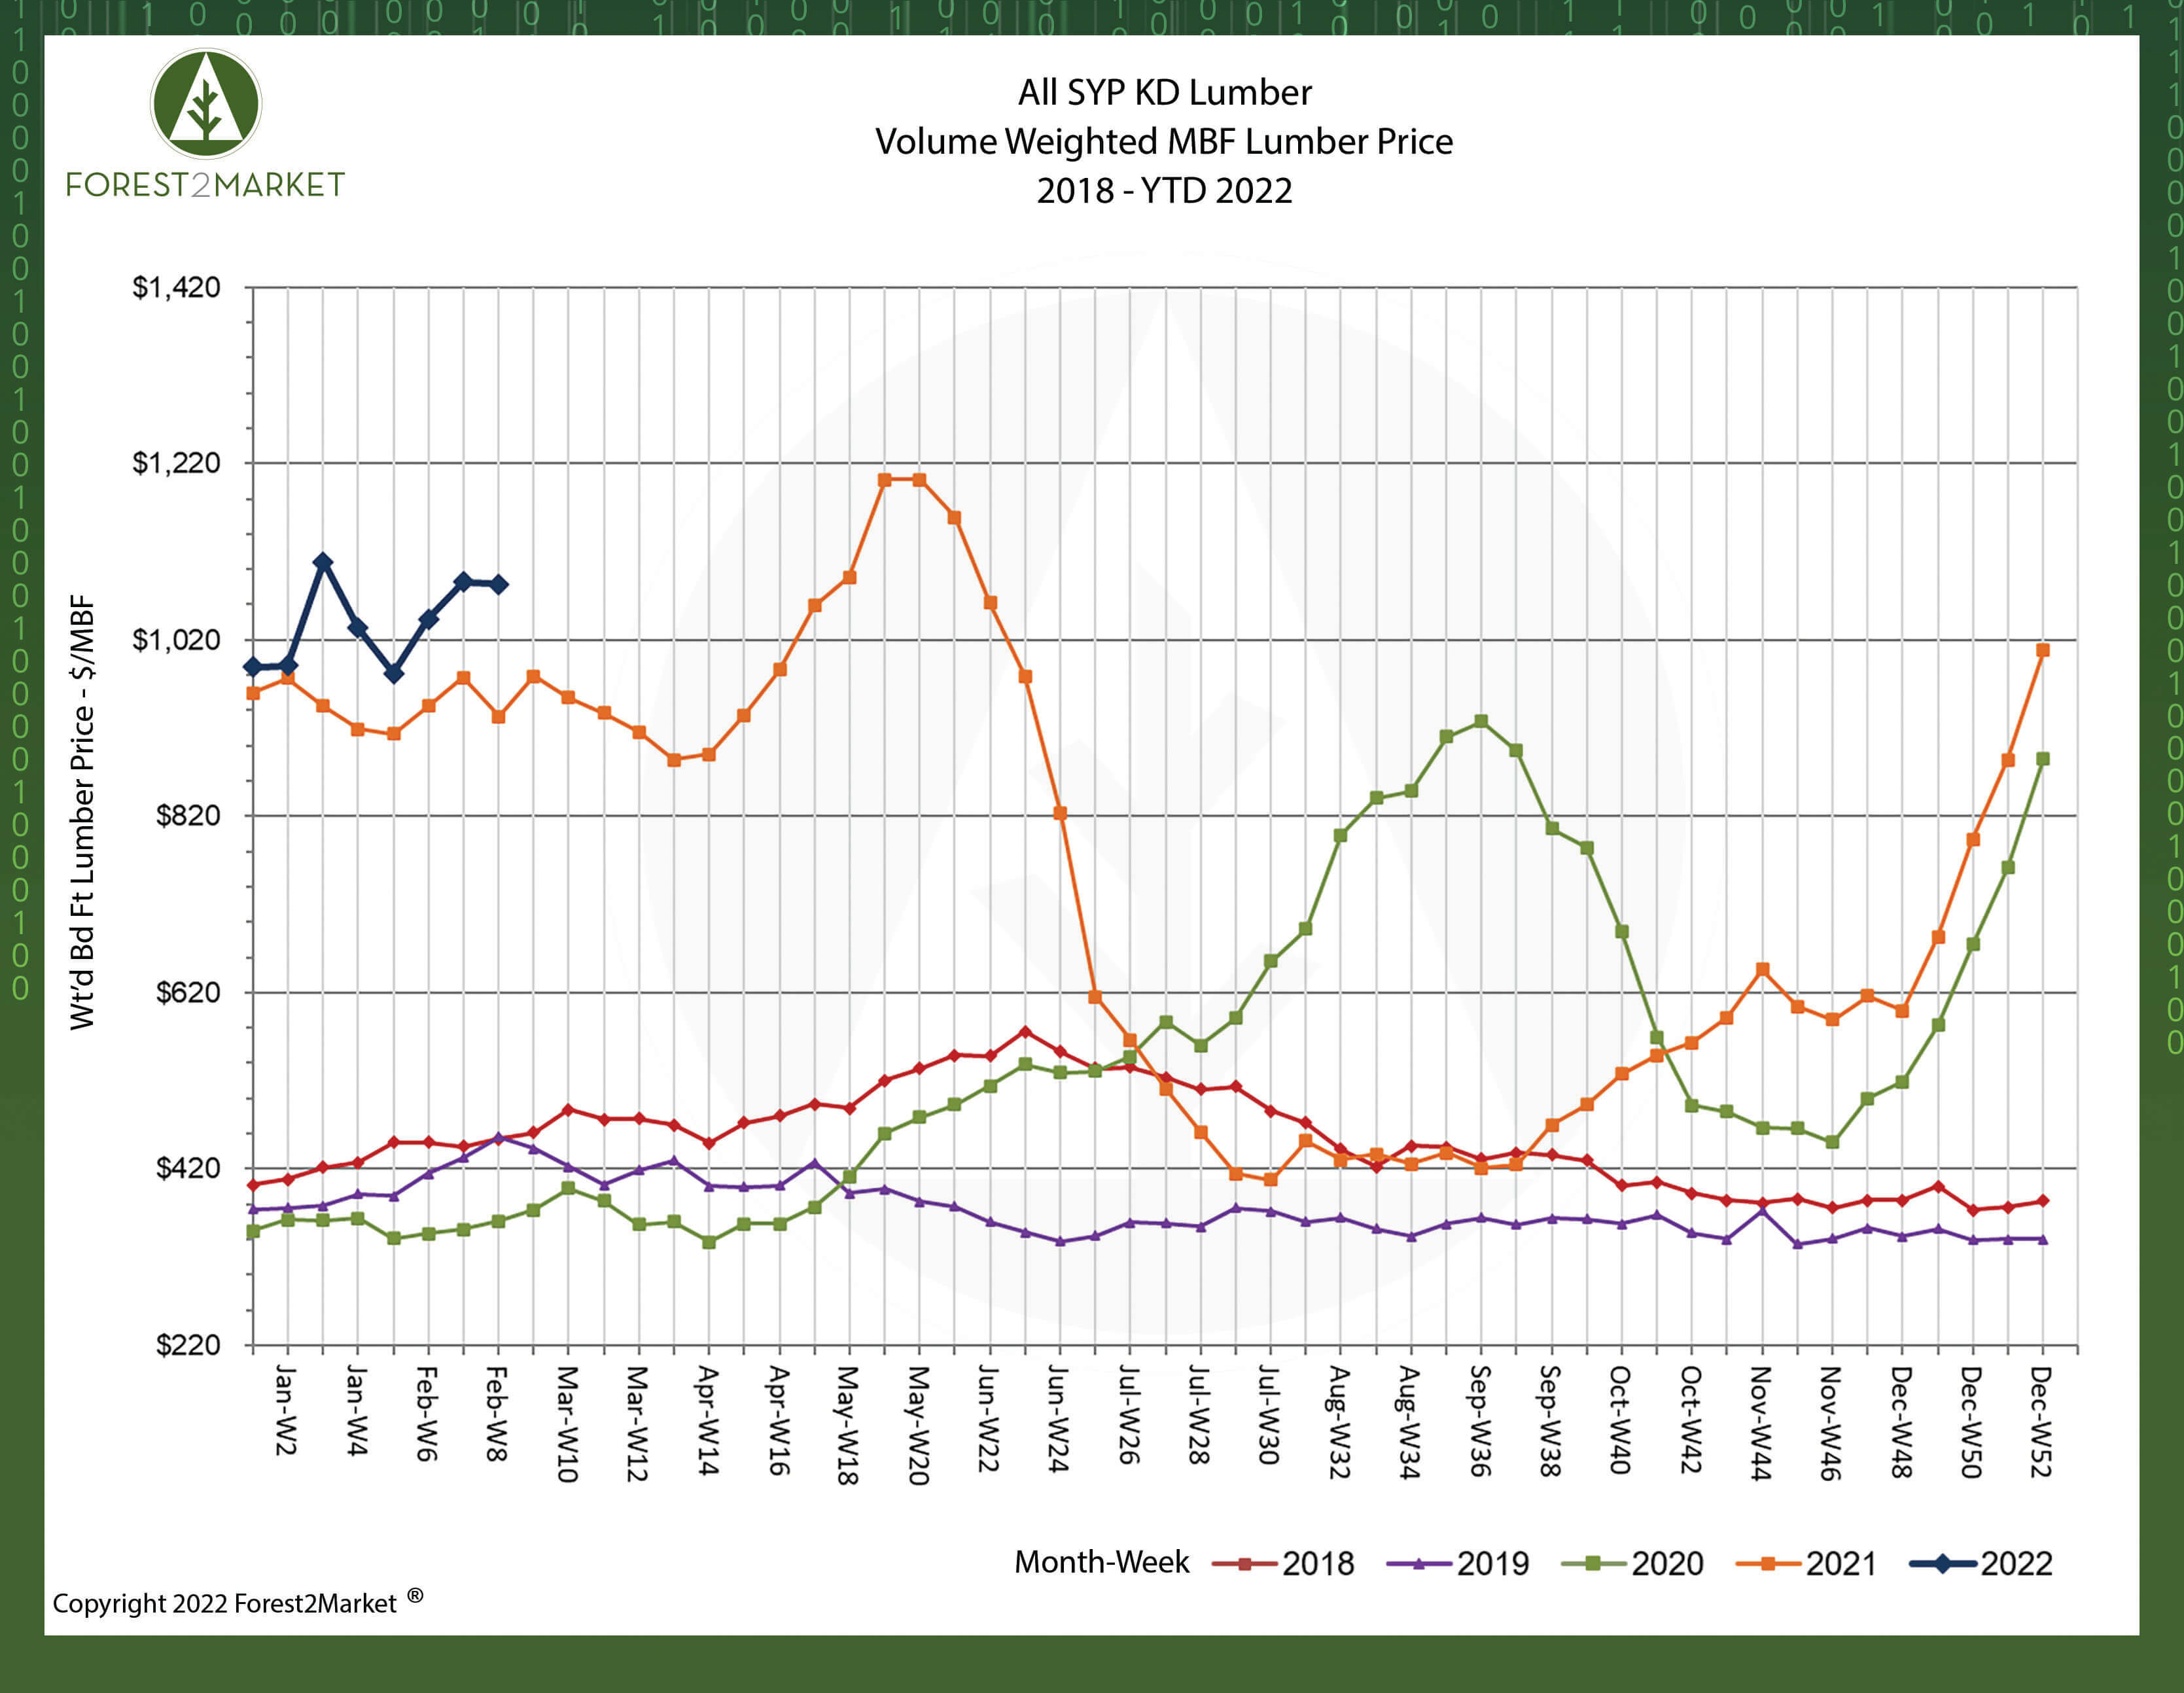 Are Southern Log Prices Finally Catching up to High Lumber Prices?